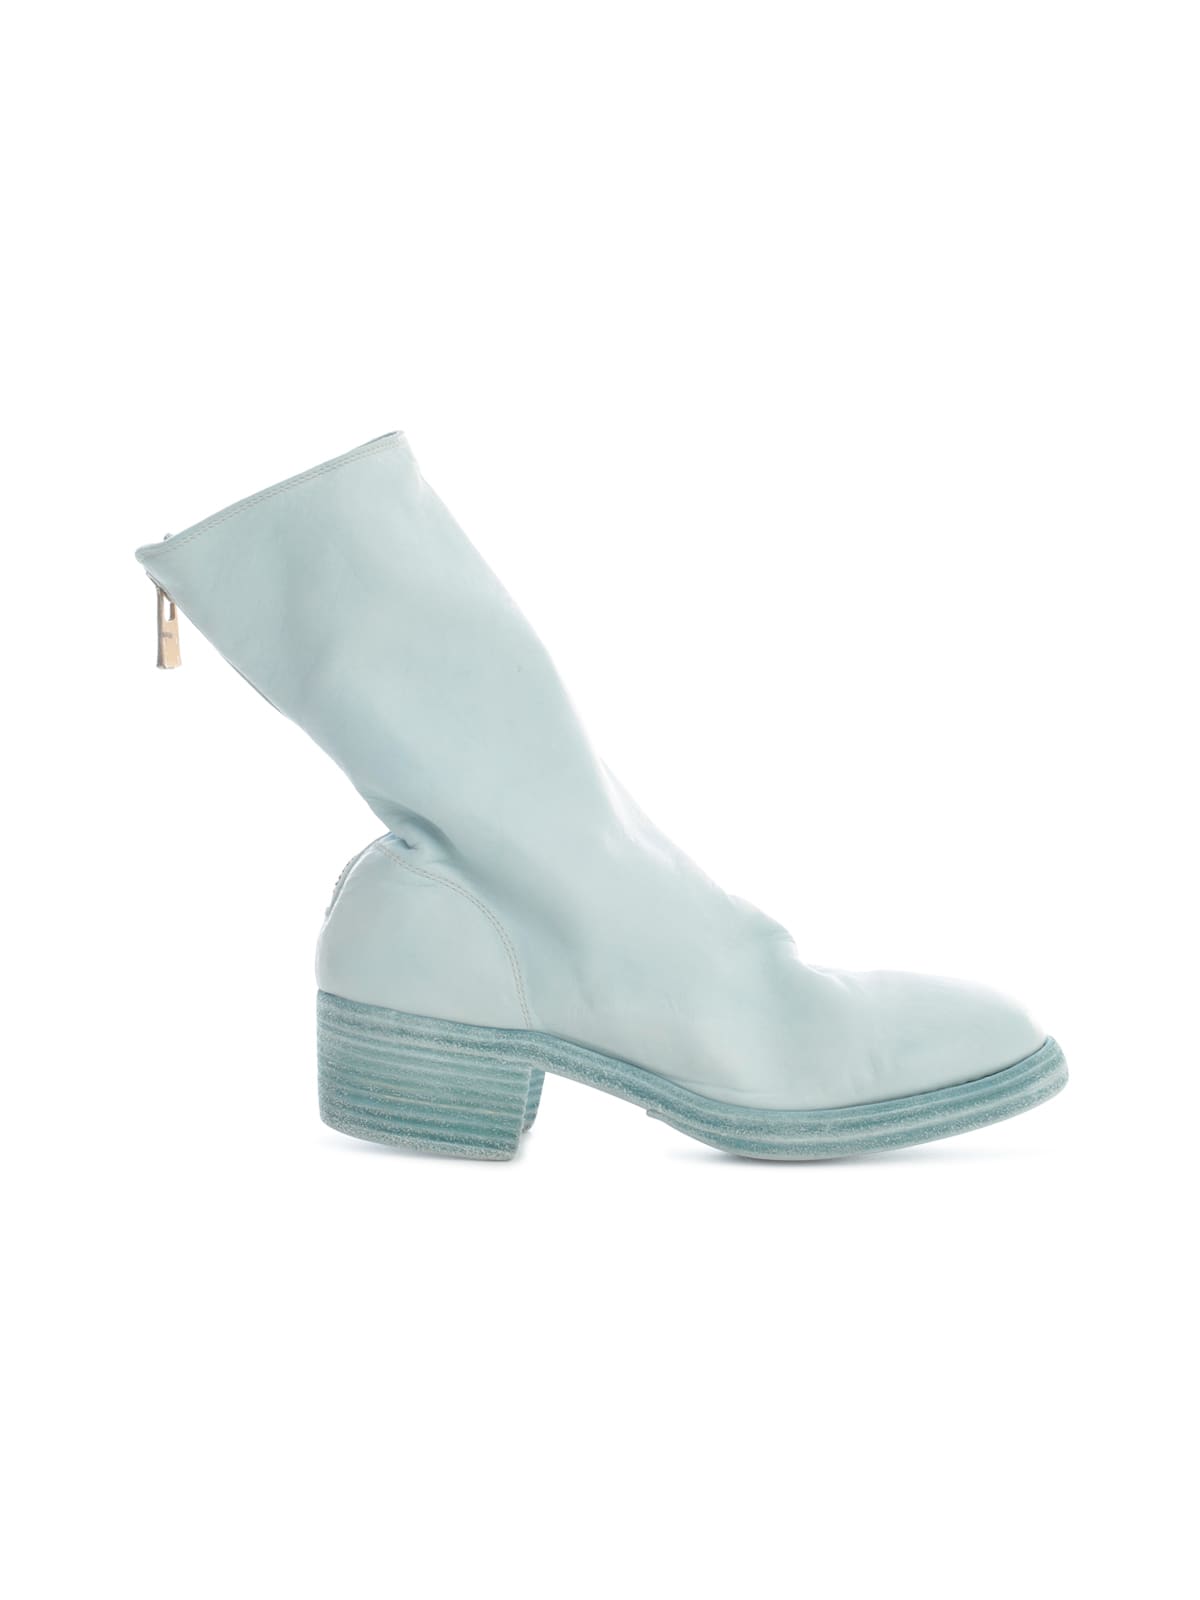 GUIDI LINED BACK ZIP MID BOOT,788Z.SOFT.HORSE088 CO77T LIGHT BLUE